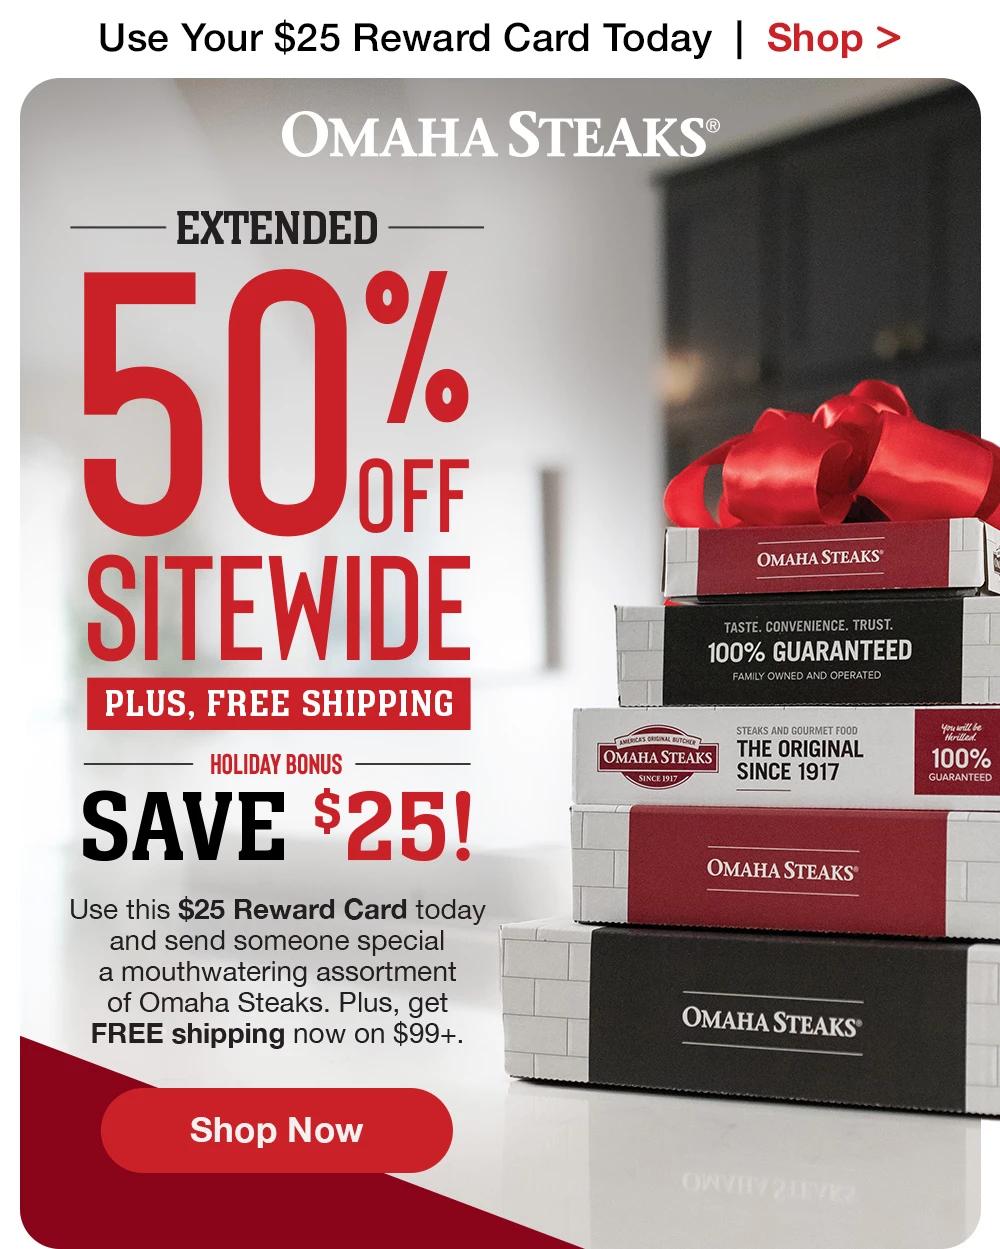 Get a $25 Reward Card  |  Shop >  OMAHA STEAKS® - 50% OFF SITEWIDE PLUS, FREE SHIPPING HOLIDAY BONUS SAVE $25! Use this $25 Reward Card today and send someone special a mouthwatering assortment of Omaha Steaks. Plus, get FREE shipping now on $99+. || SHOP NOW